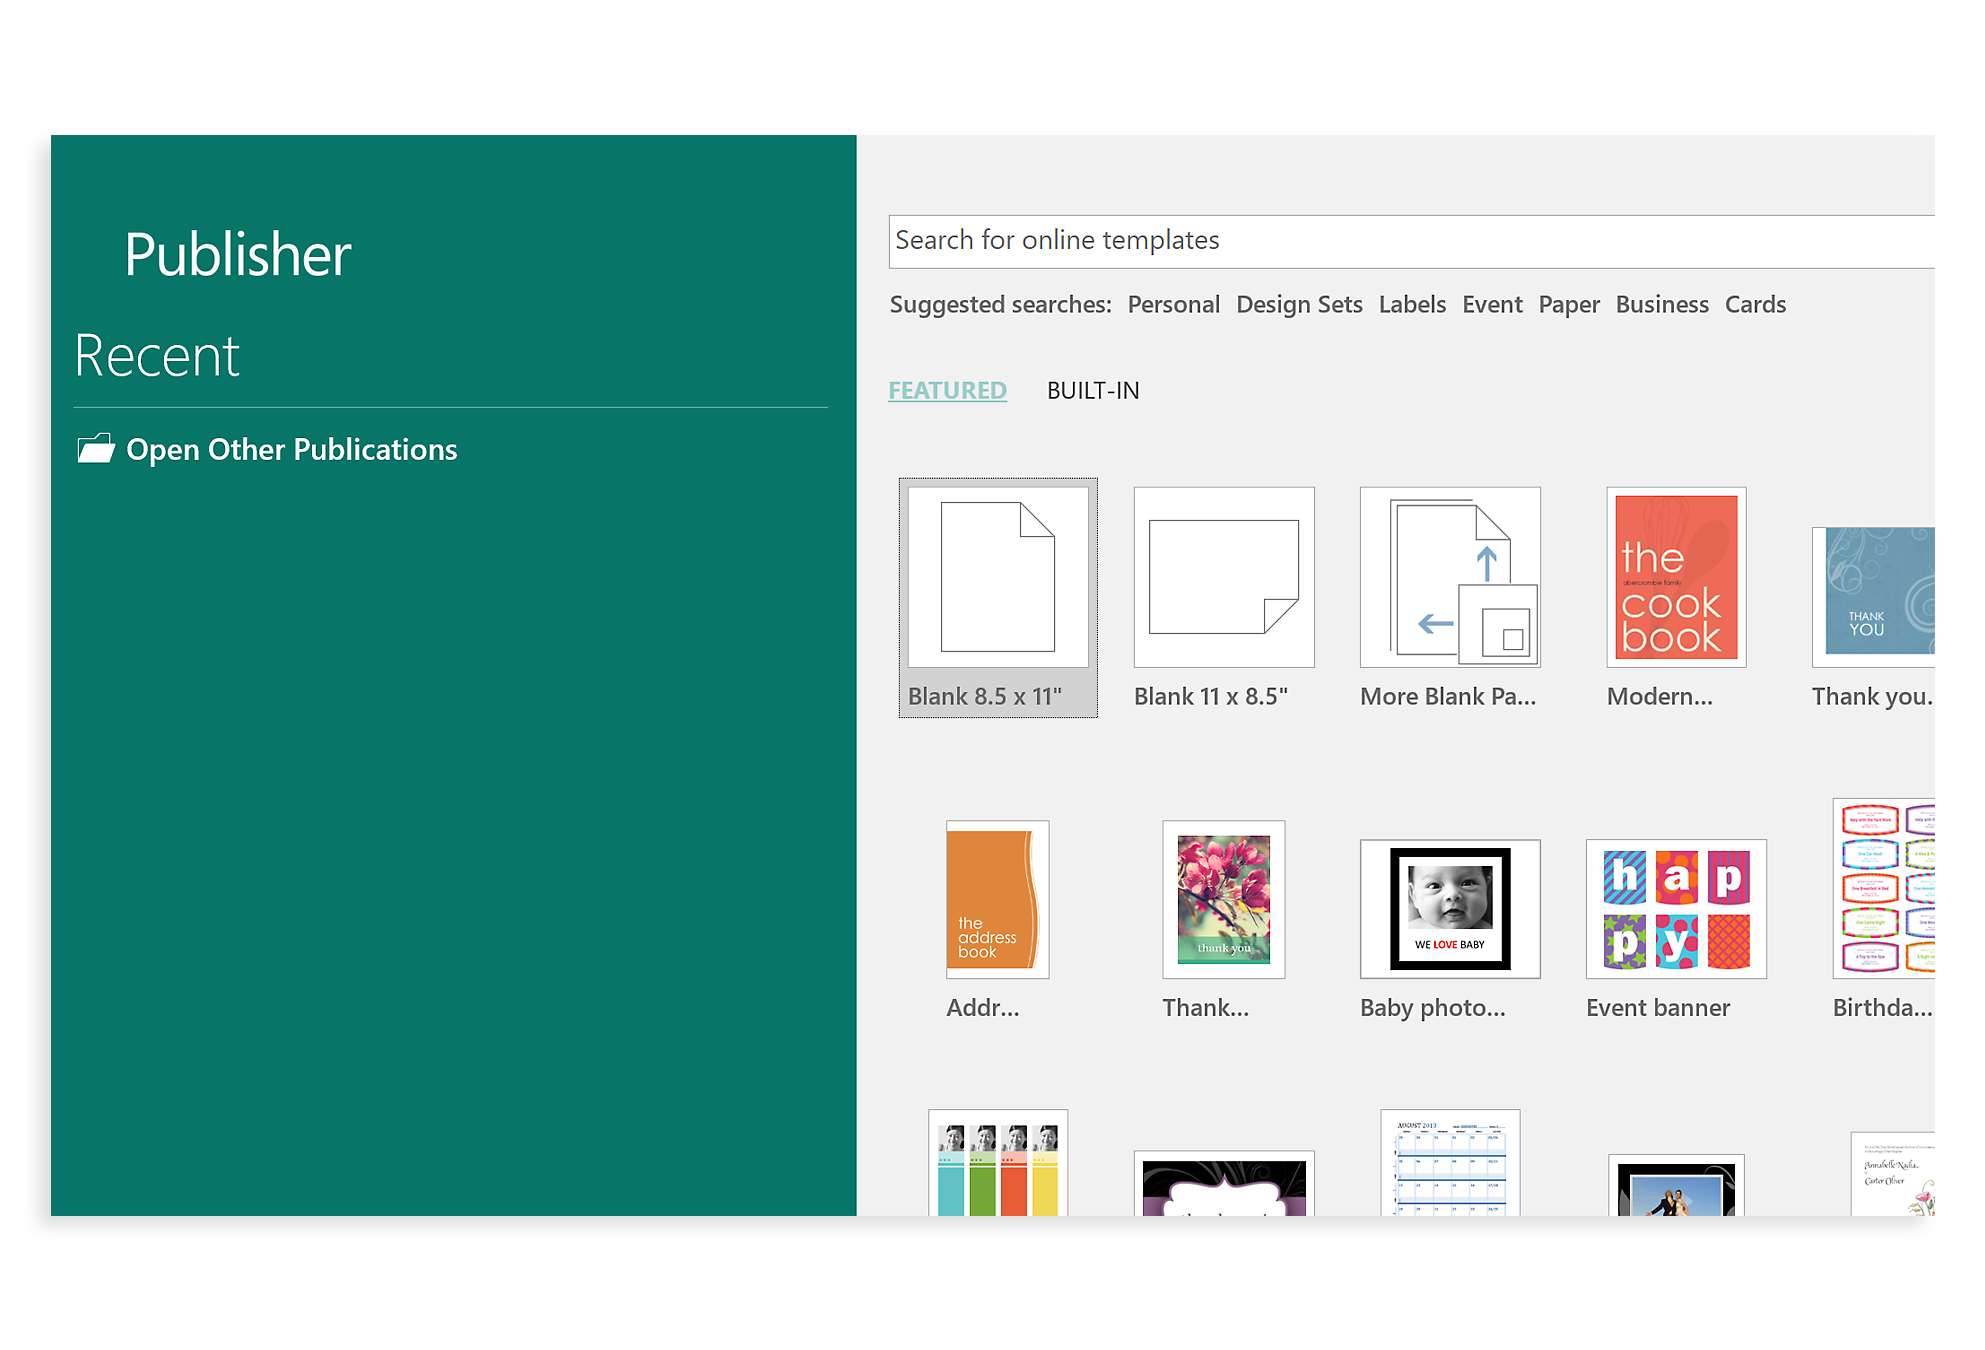 Is There a Free Version of Microsoft Publisher?